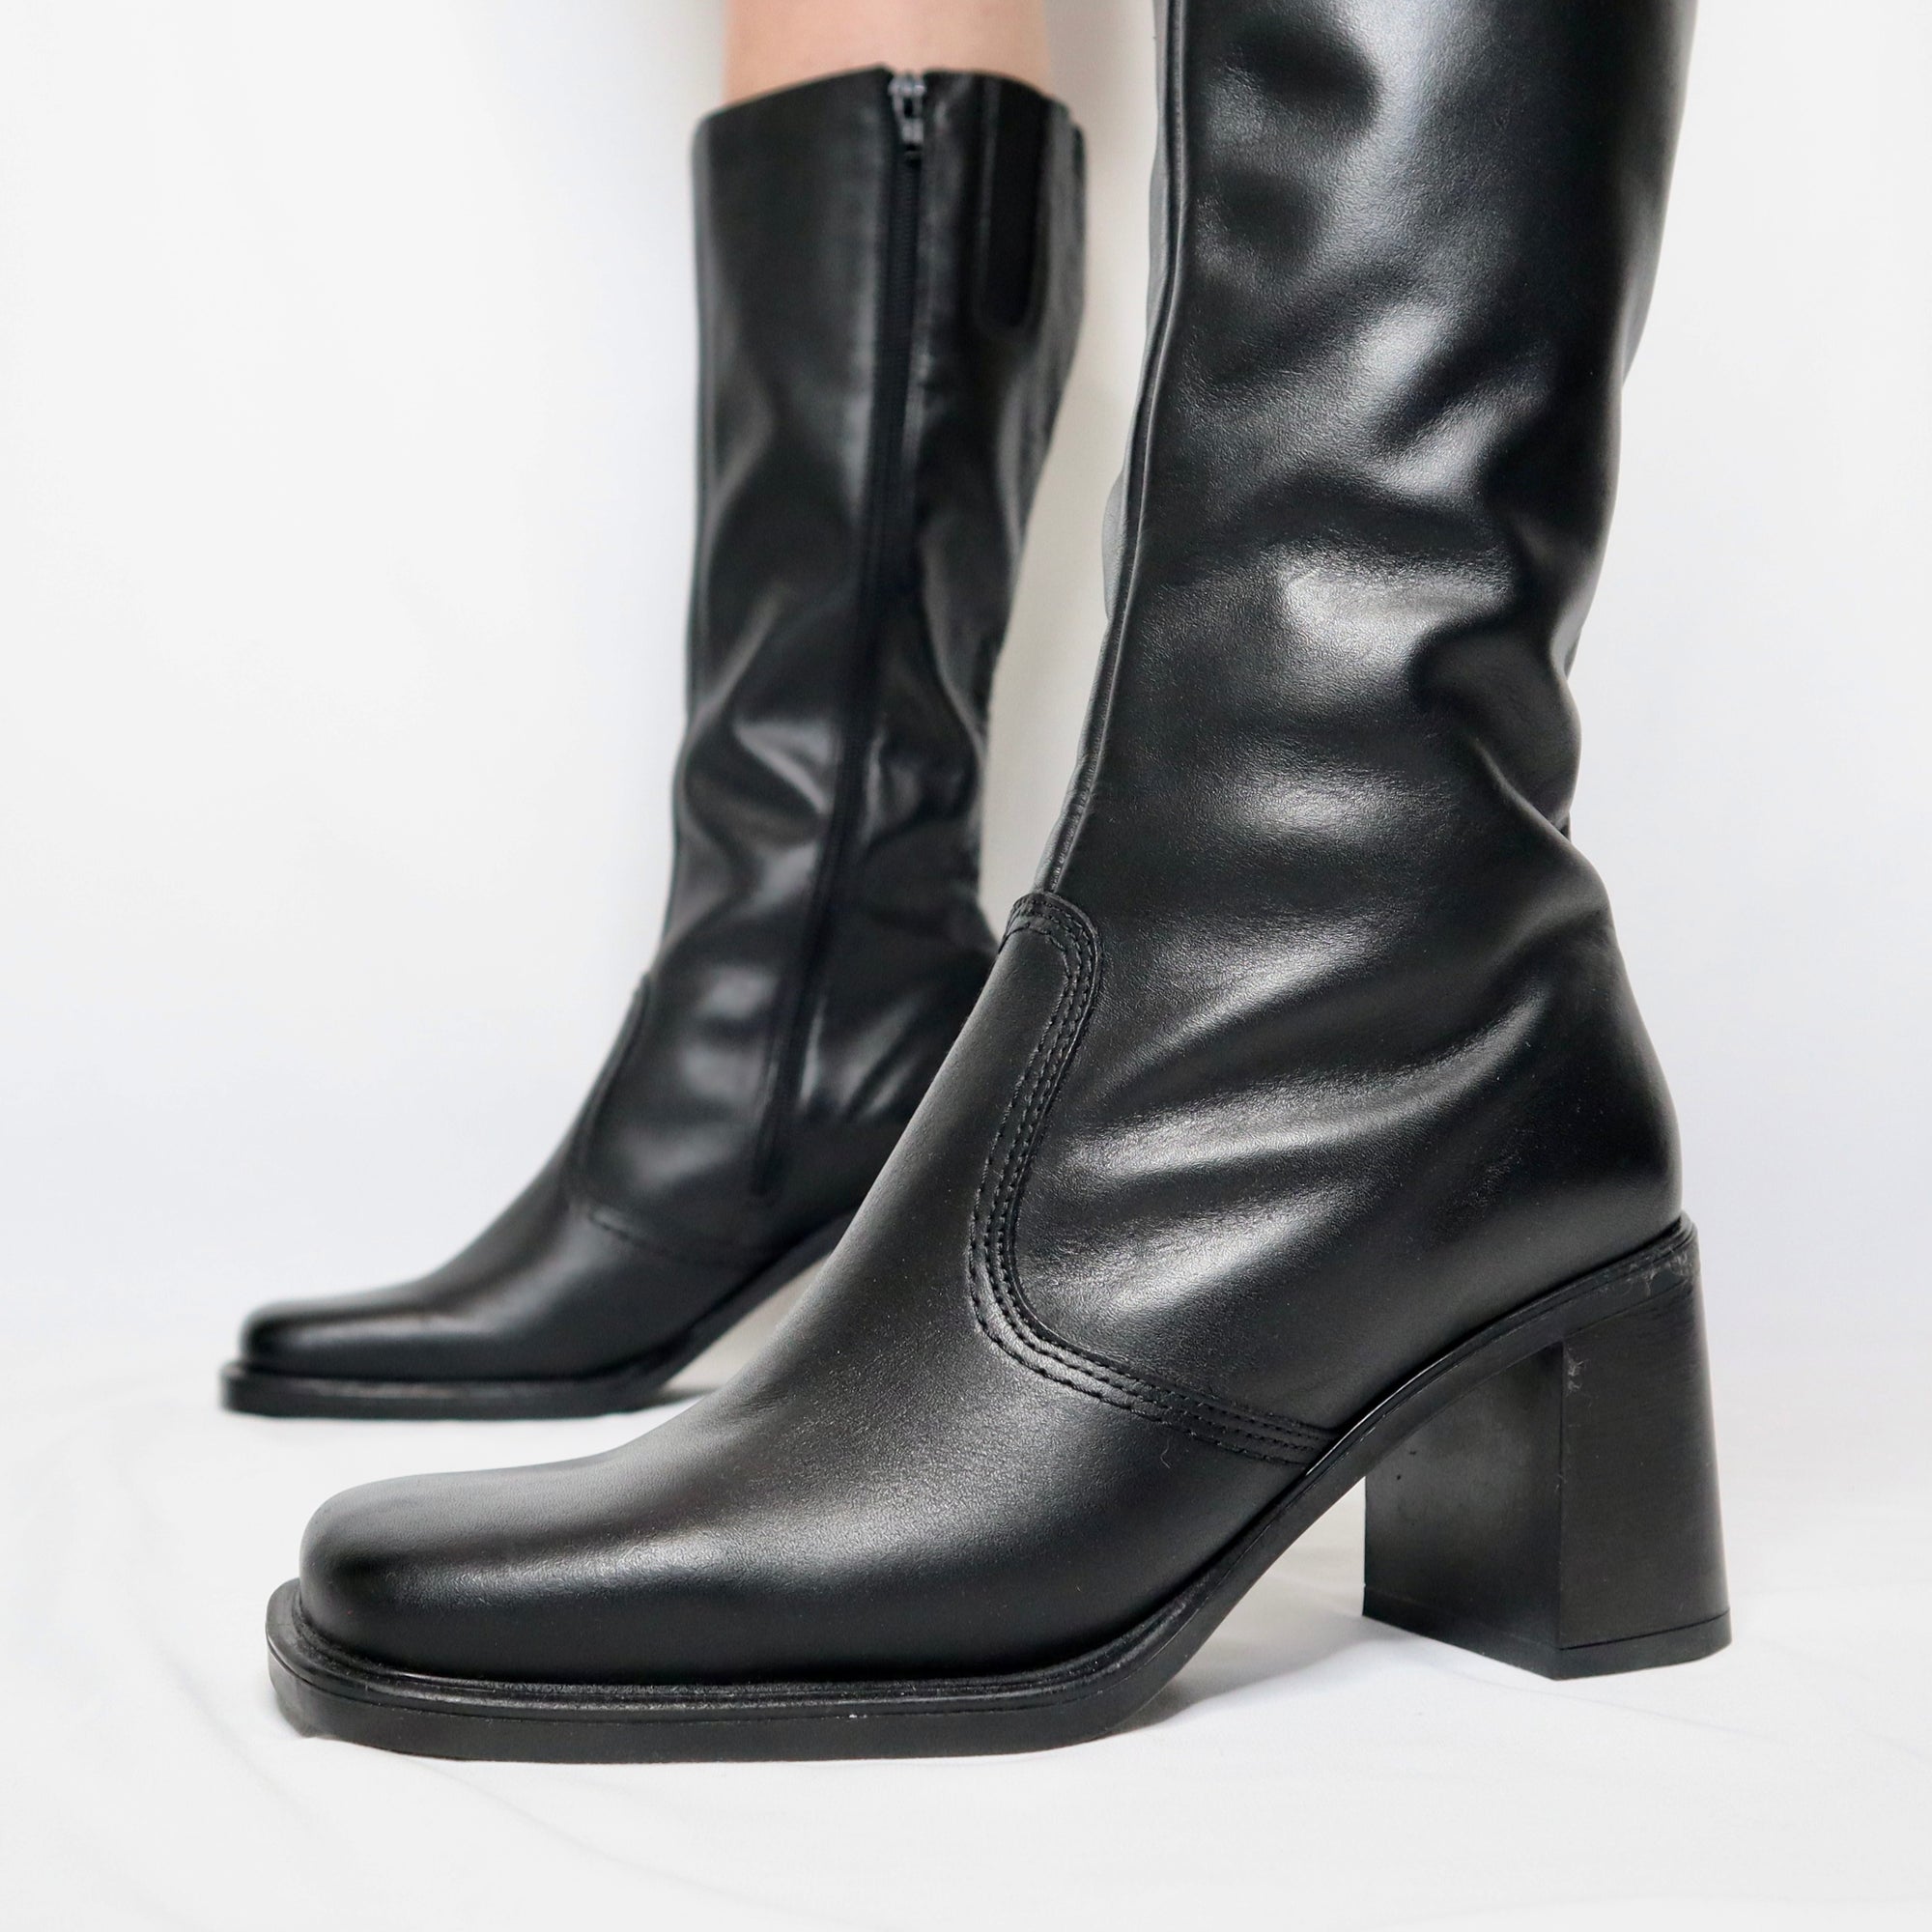 Tall Black Leather Boots 